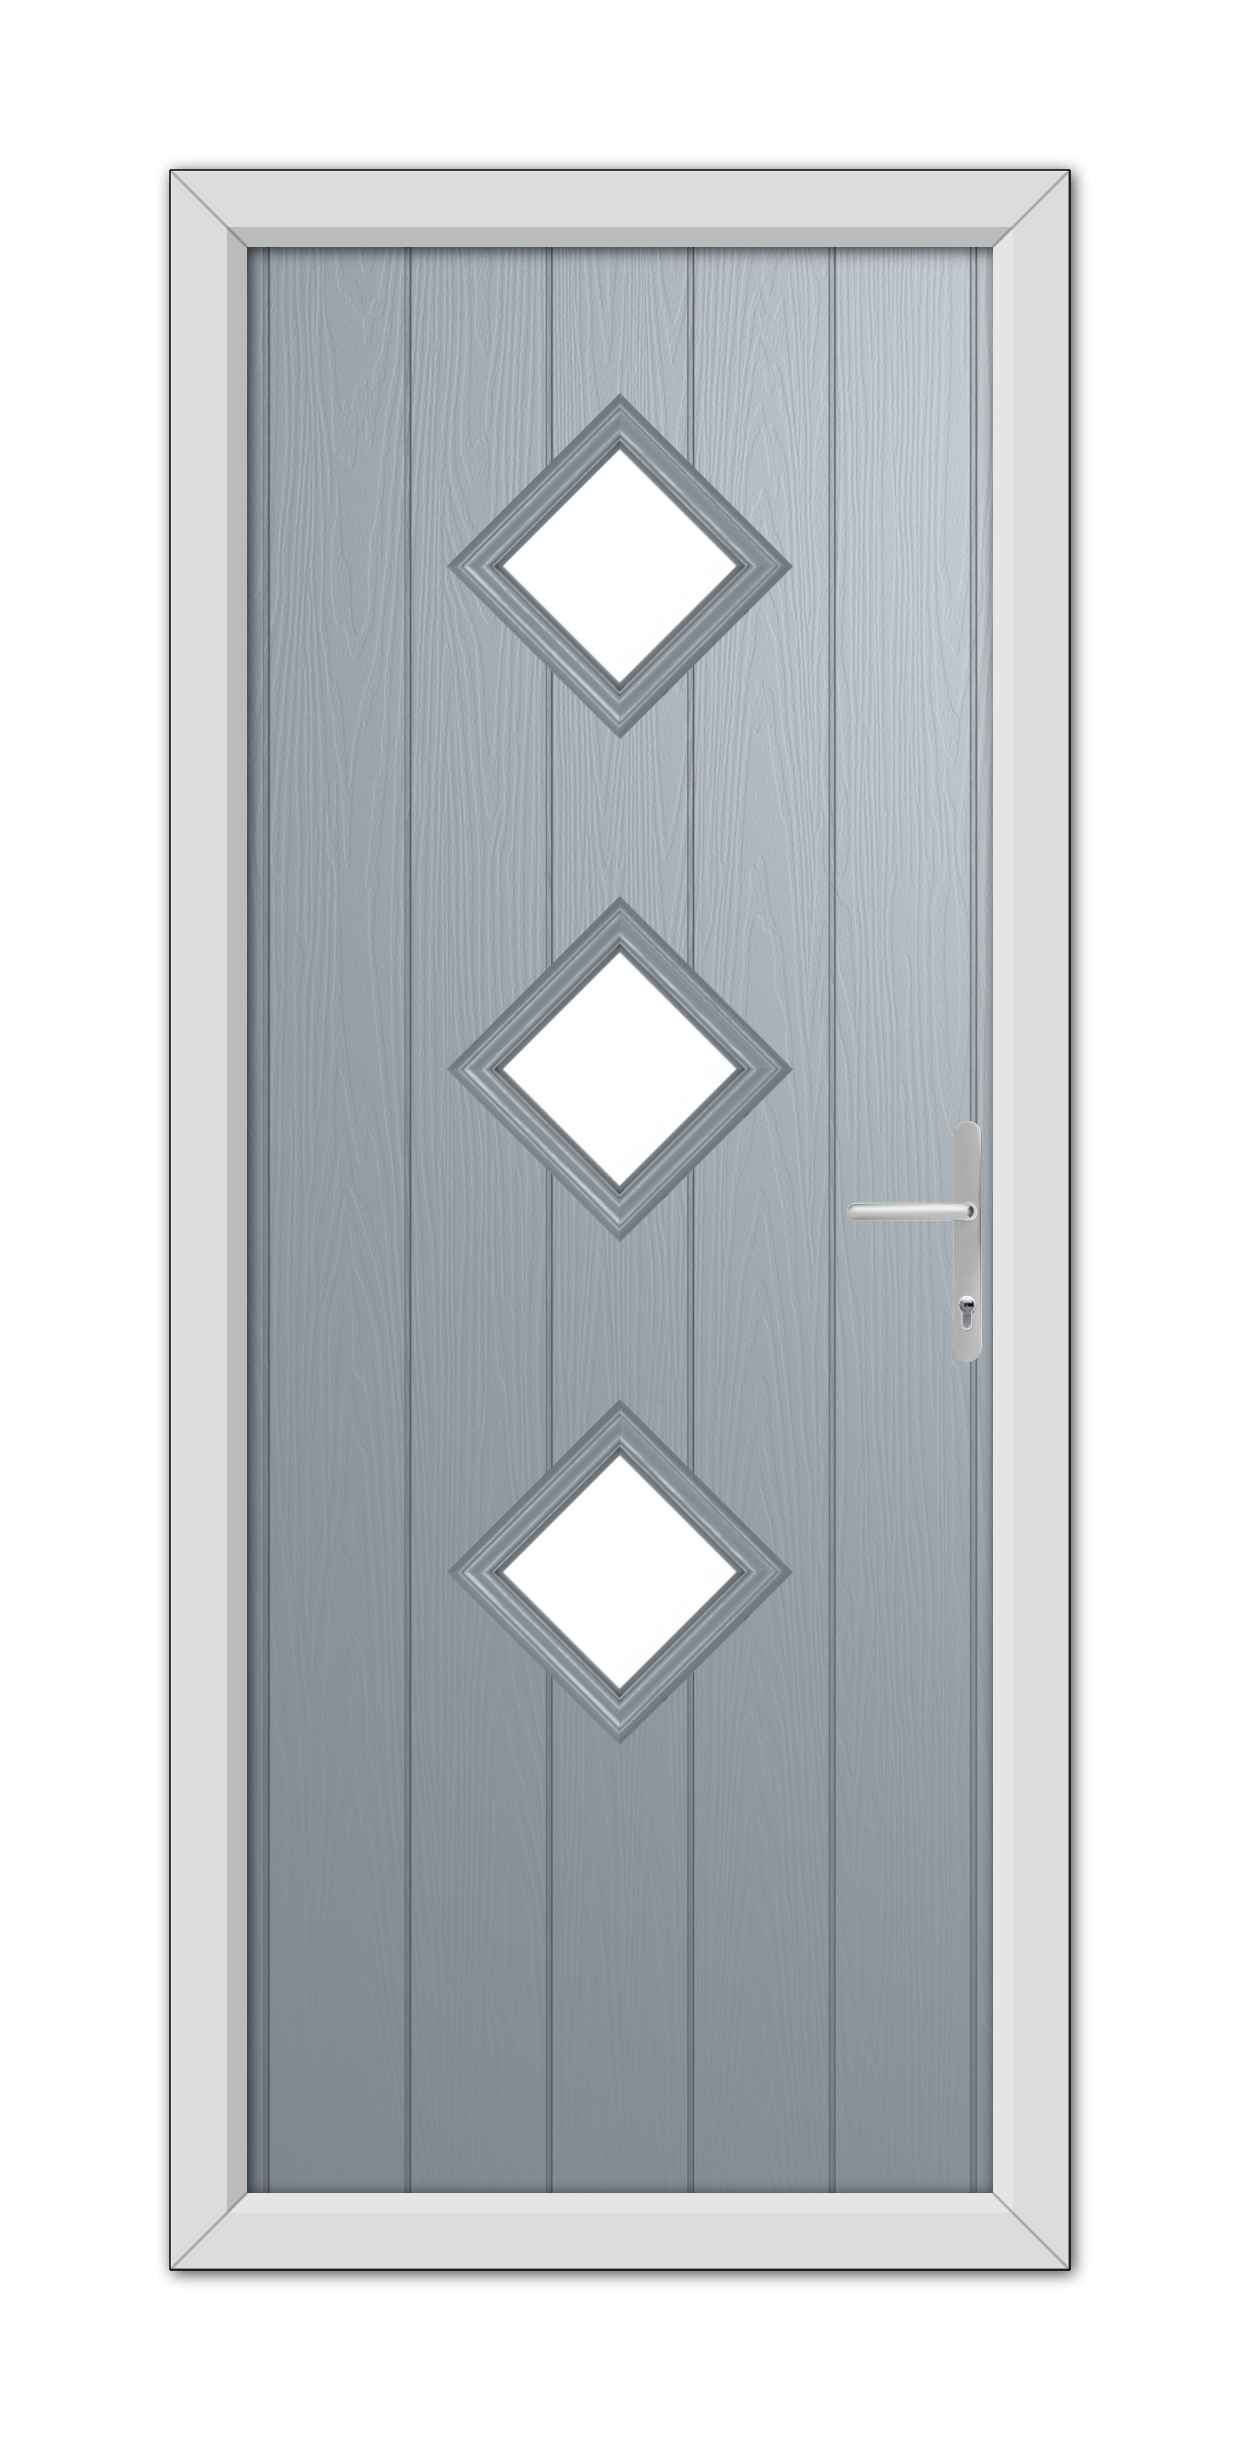 A modern French Grey Richmond Composite Door 48mm Timber Core with three diamond-shaped windows and a steel handle, set in a white frame.